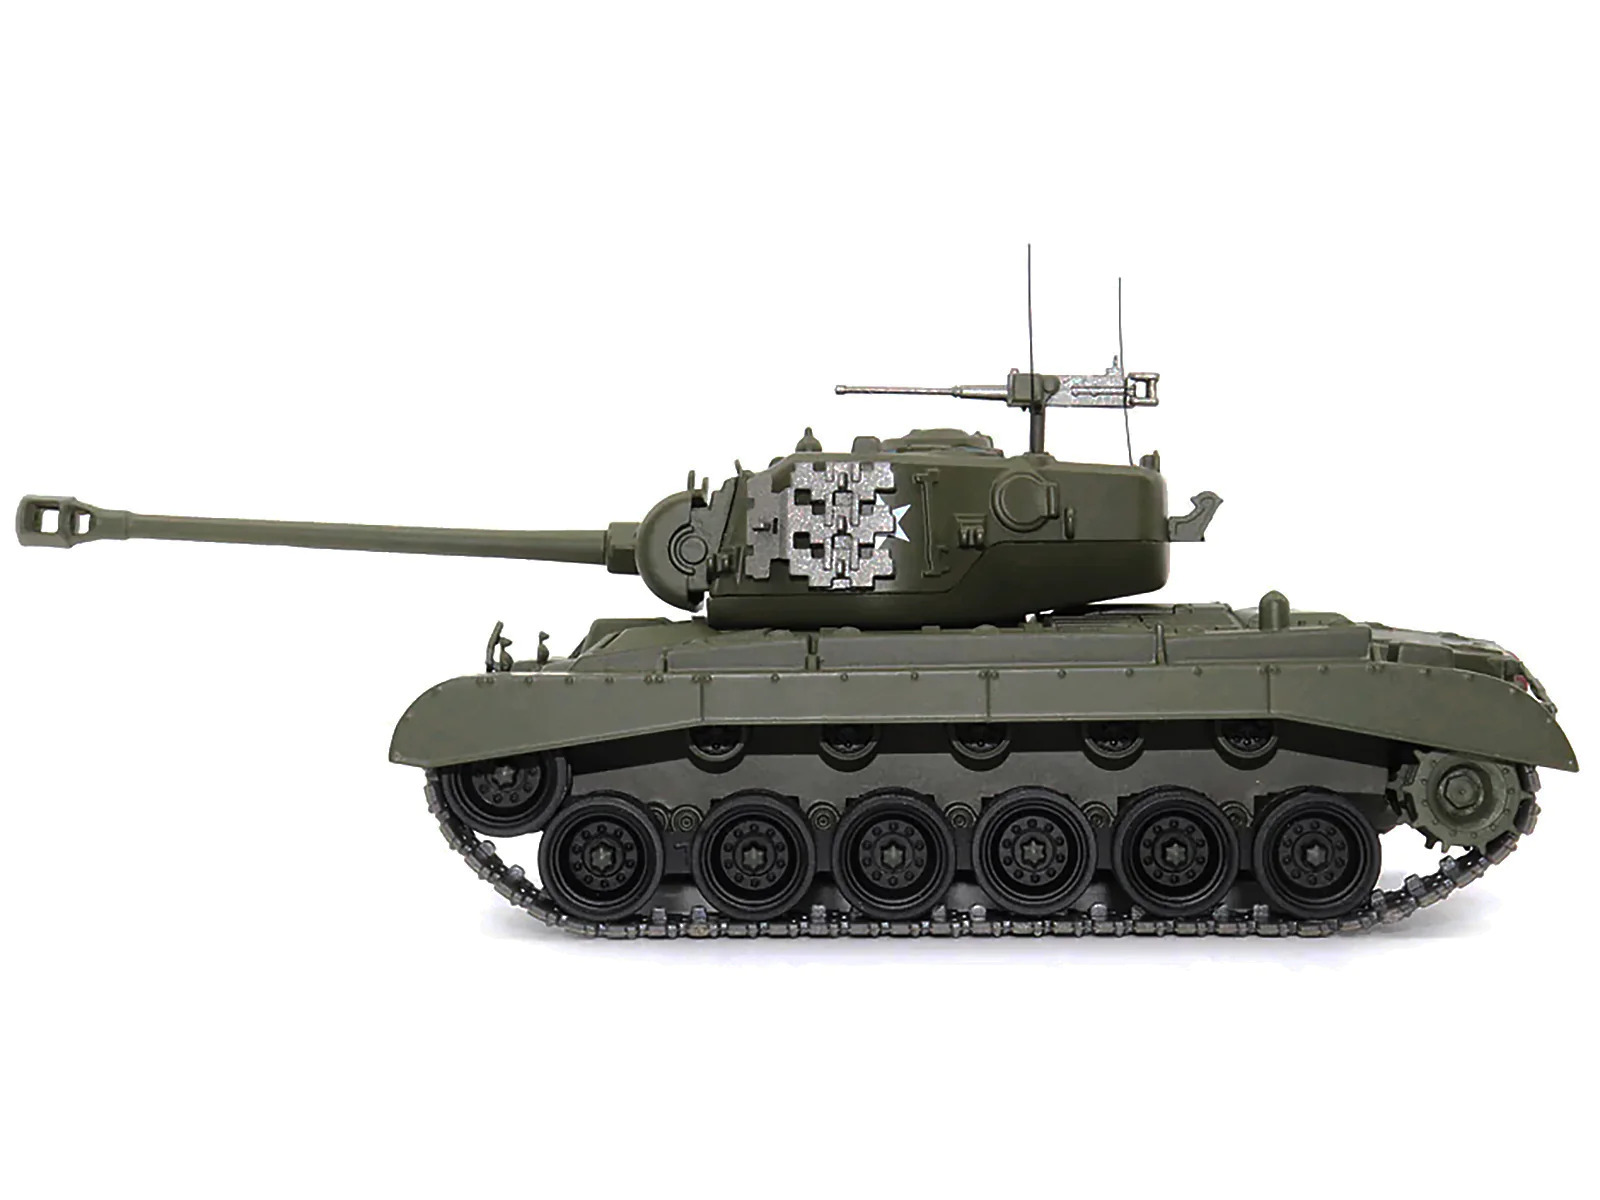 M26 T26E3 Tank USA 2nd Armored Division Germany April 1945 1/43 Diecast Model